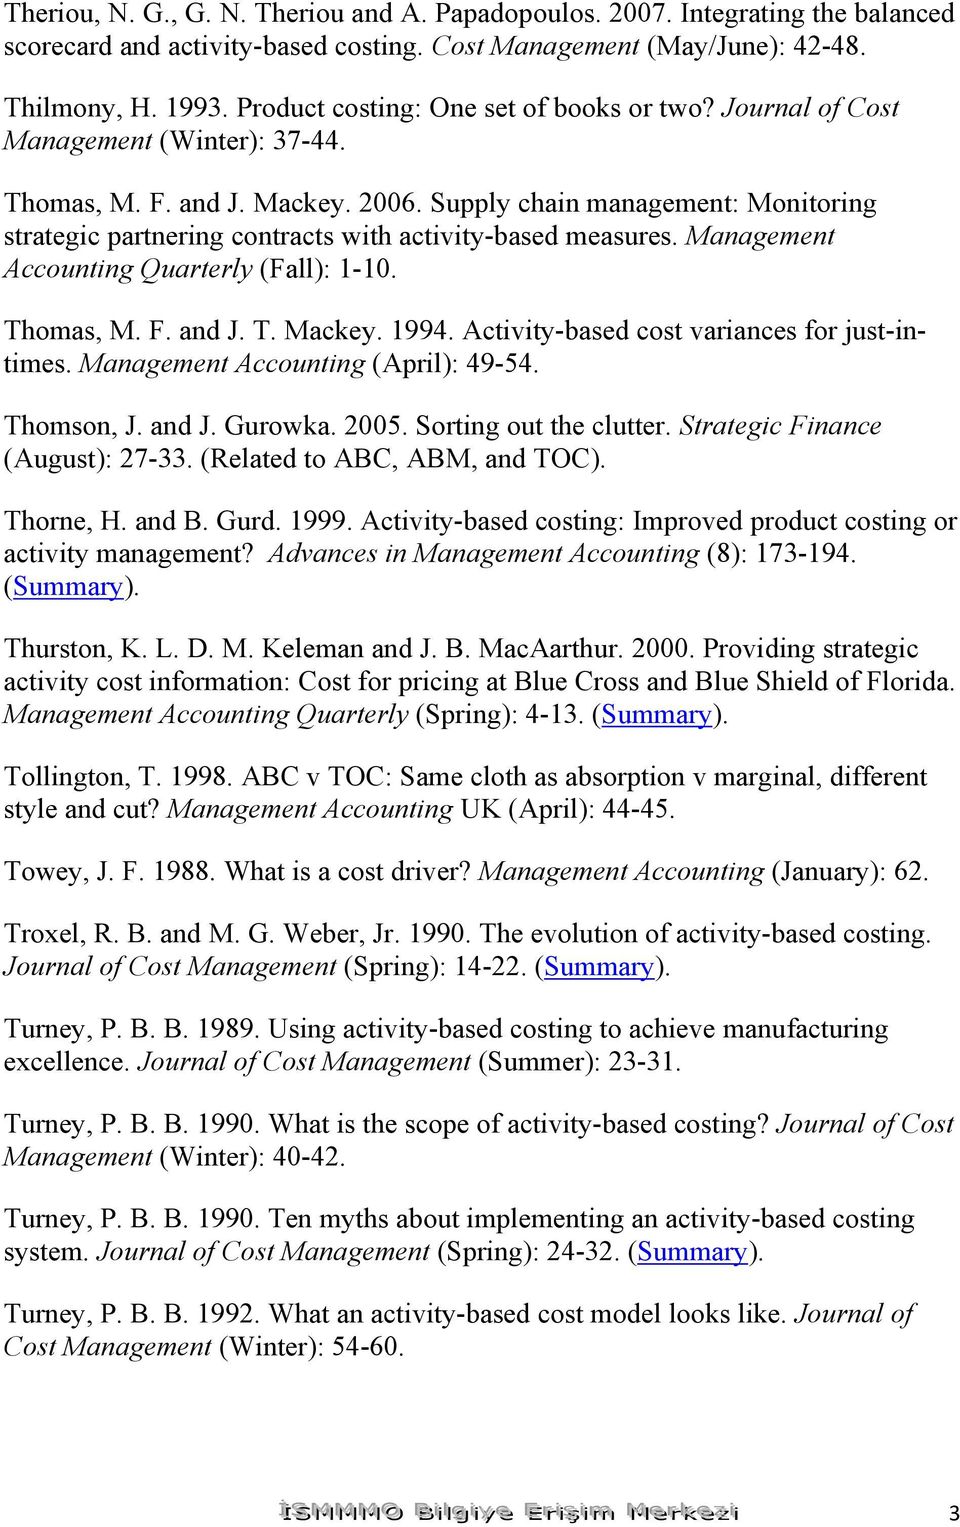 Supply chain management: Monitoring strategic partnering contracts with activity-based measures. Management Accounting Quarterly (Fall): 1-10. Thomas, M. F. and J. T. Mackey. 1994.